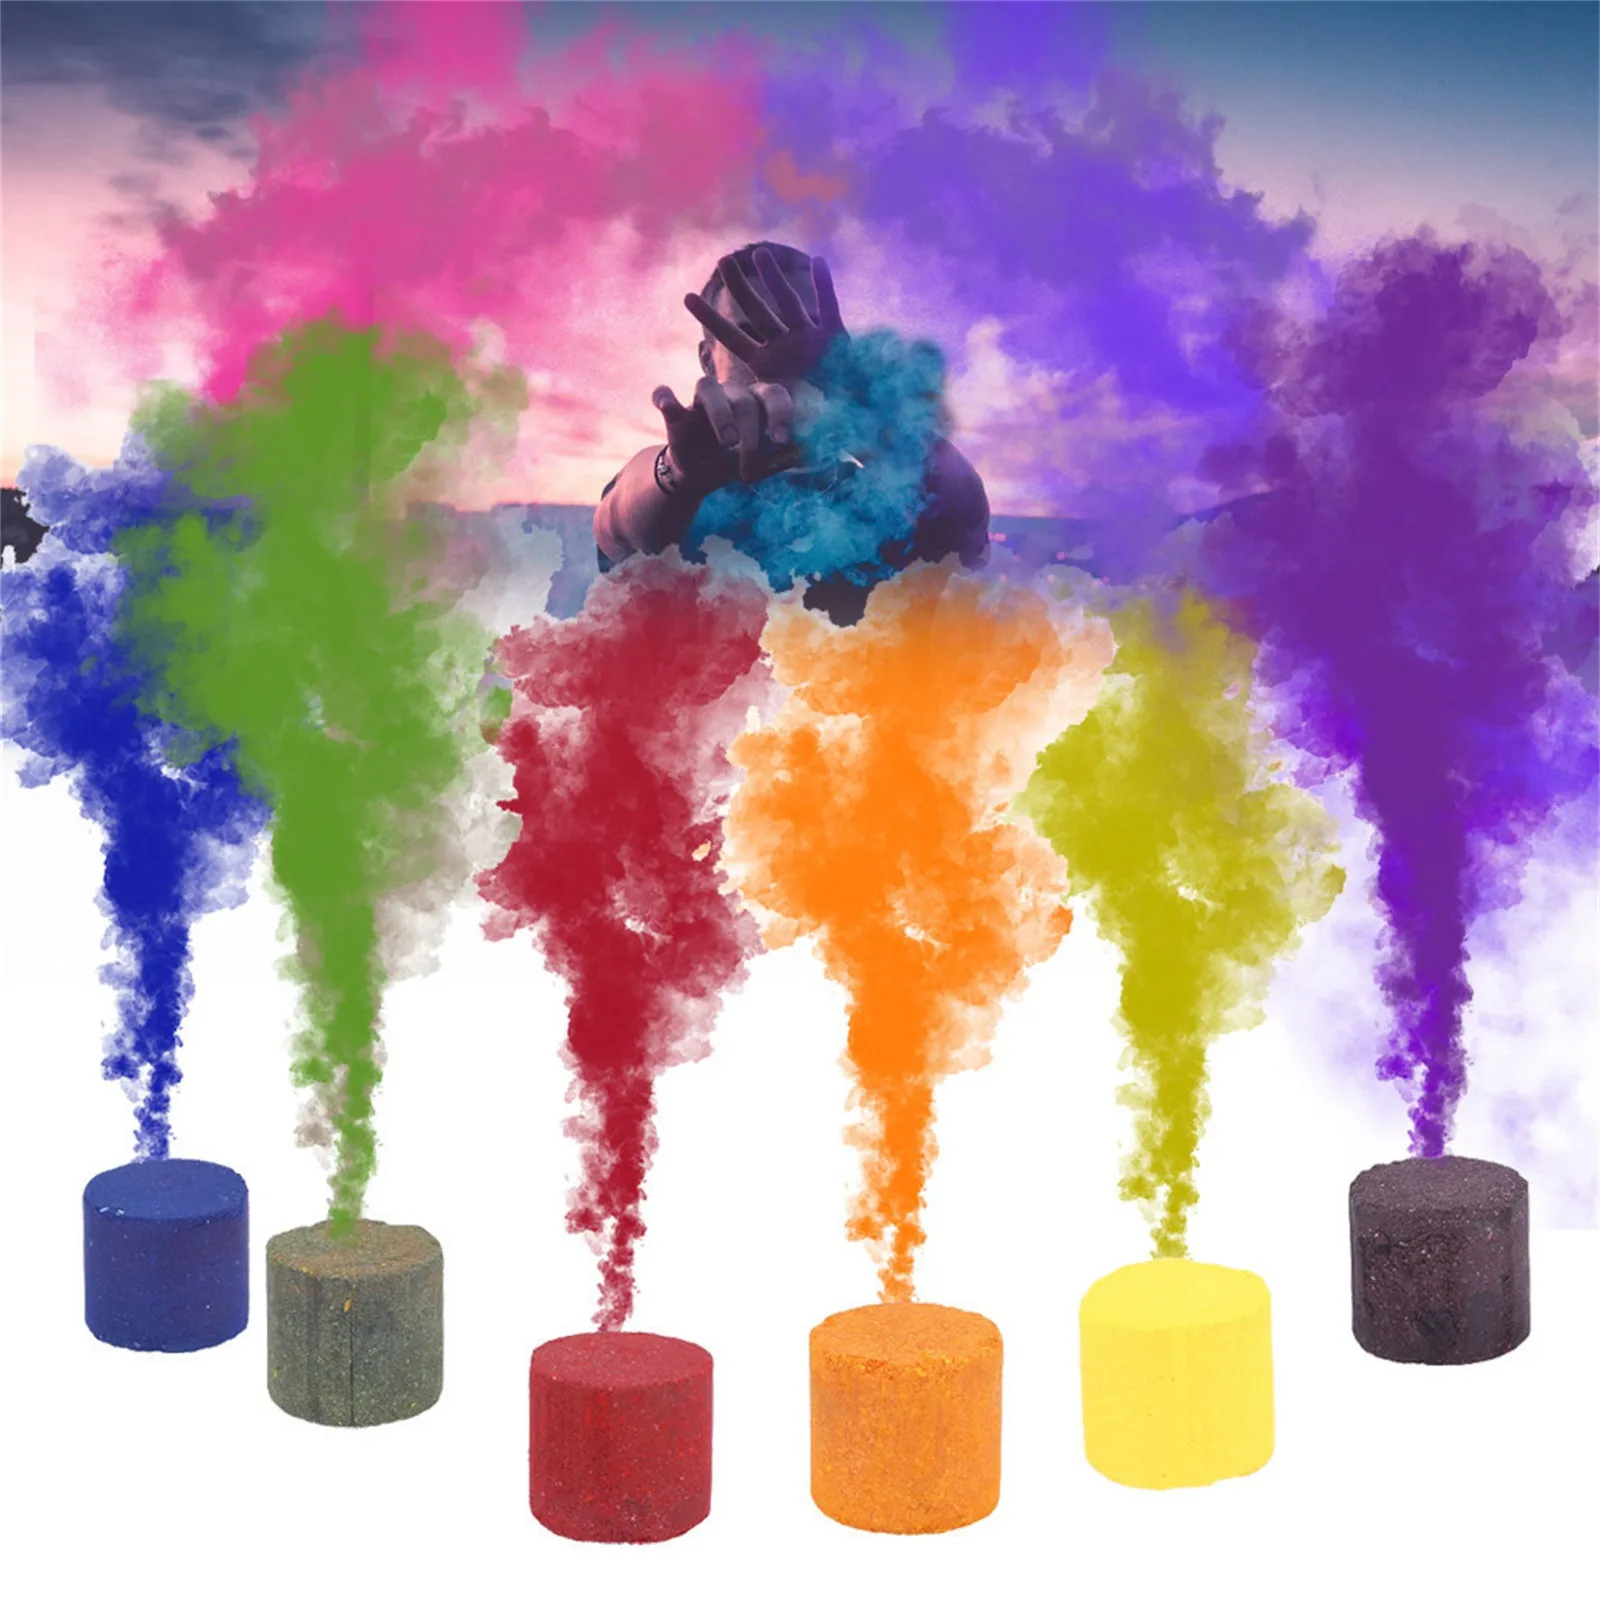 6PC/Red+Yellow+Blue+Green+Orange+Purple 6PC Colorful Smoke Cake Smoke Effect for Photography Halloween Christmas Party Stage Show Studio Photo Props Magic Fog 